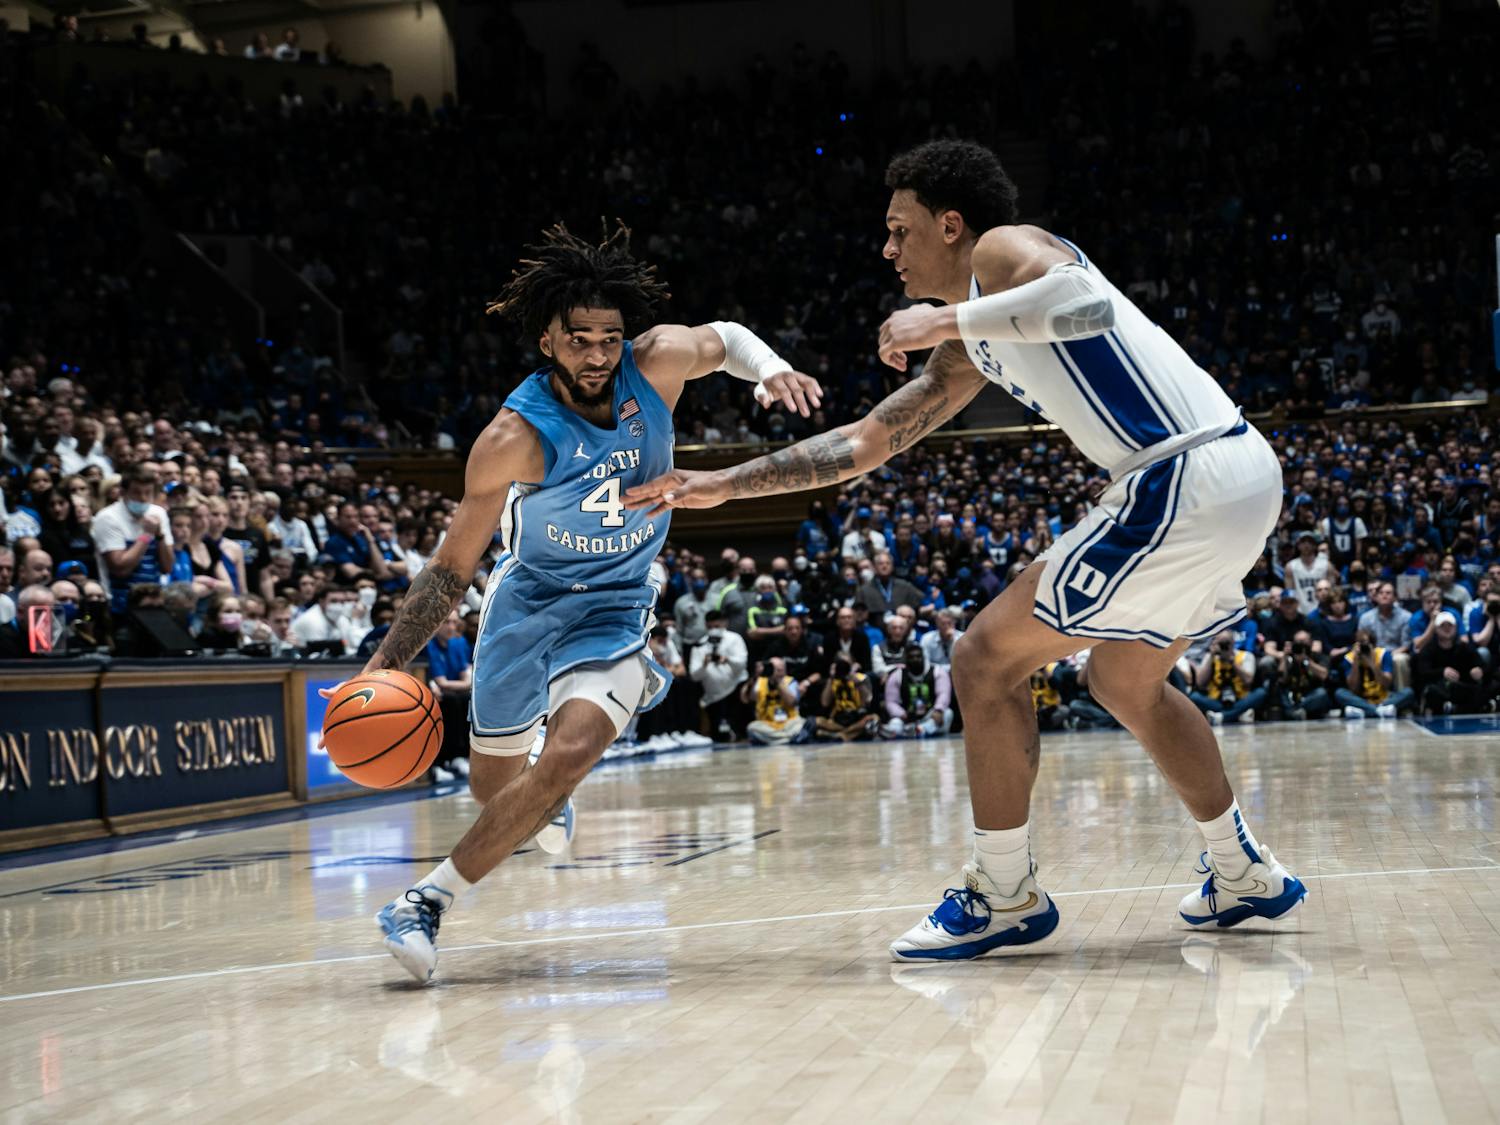 North Carolina beat Duke 94-81 March 5 after the Blue Devils won by 20 points in Chapel Hill a month earlier.